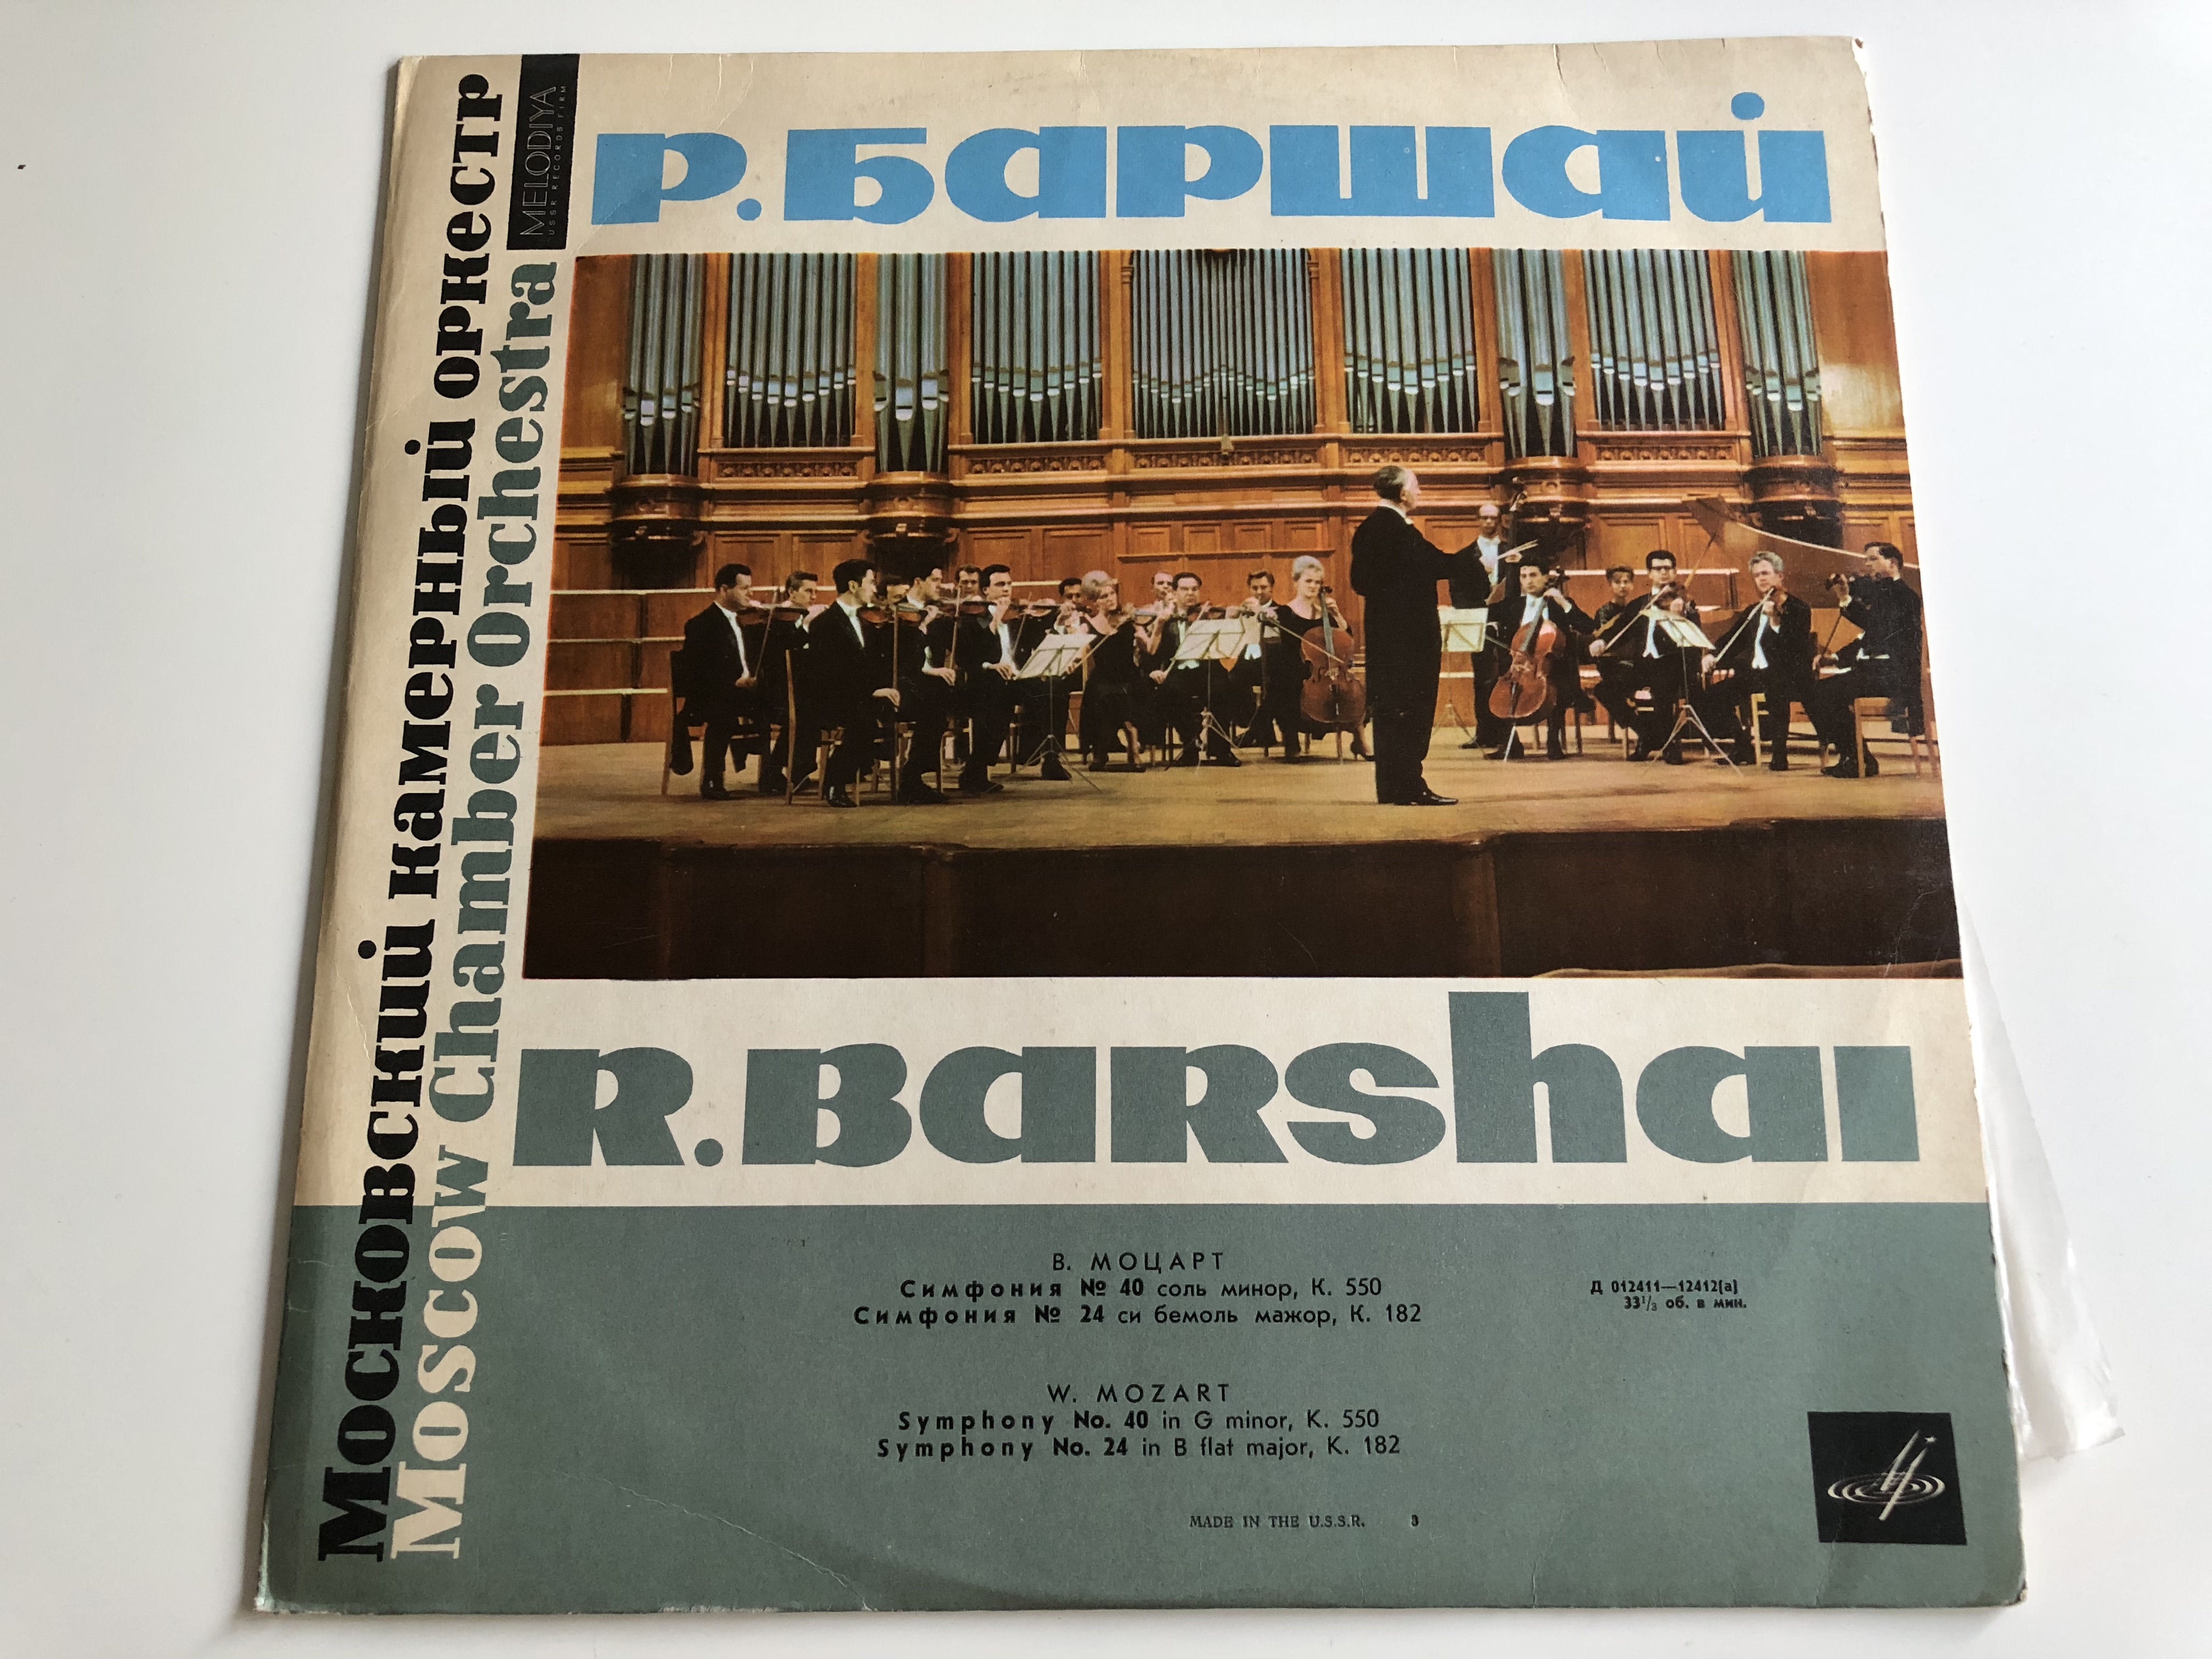 r.-barshai-moscow-chamber-orchestra-mozart-symphony-no.-40-in-g-minor-k.550-symphony-no.-24-in-b-flat-major-k.182-made-in-ussr-d-012411-12412-a-1-.jpg